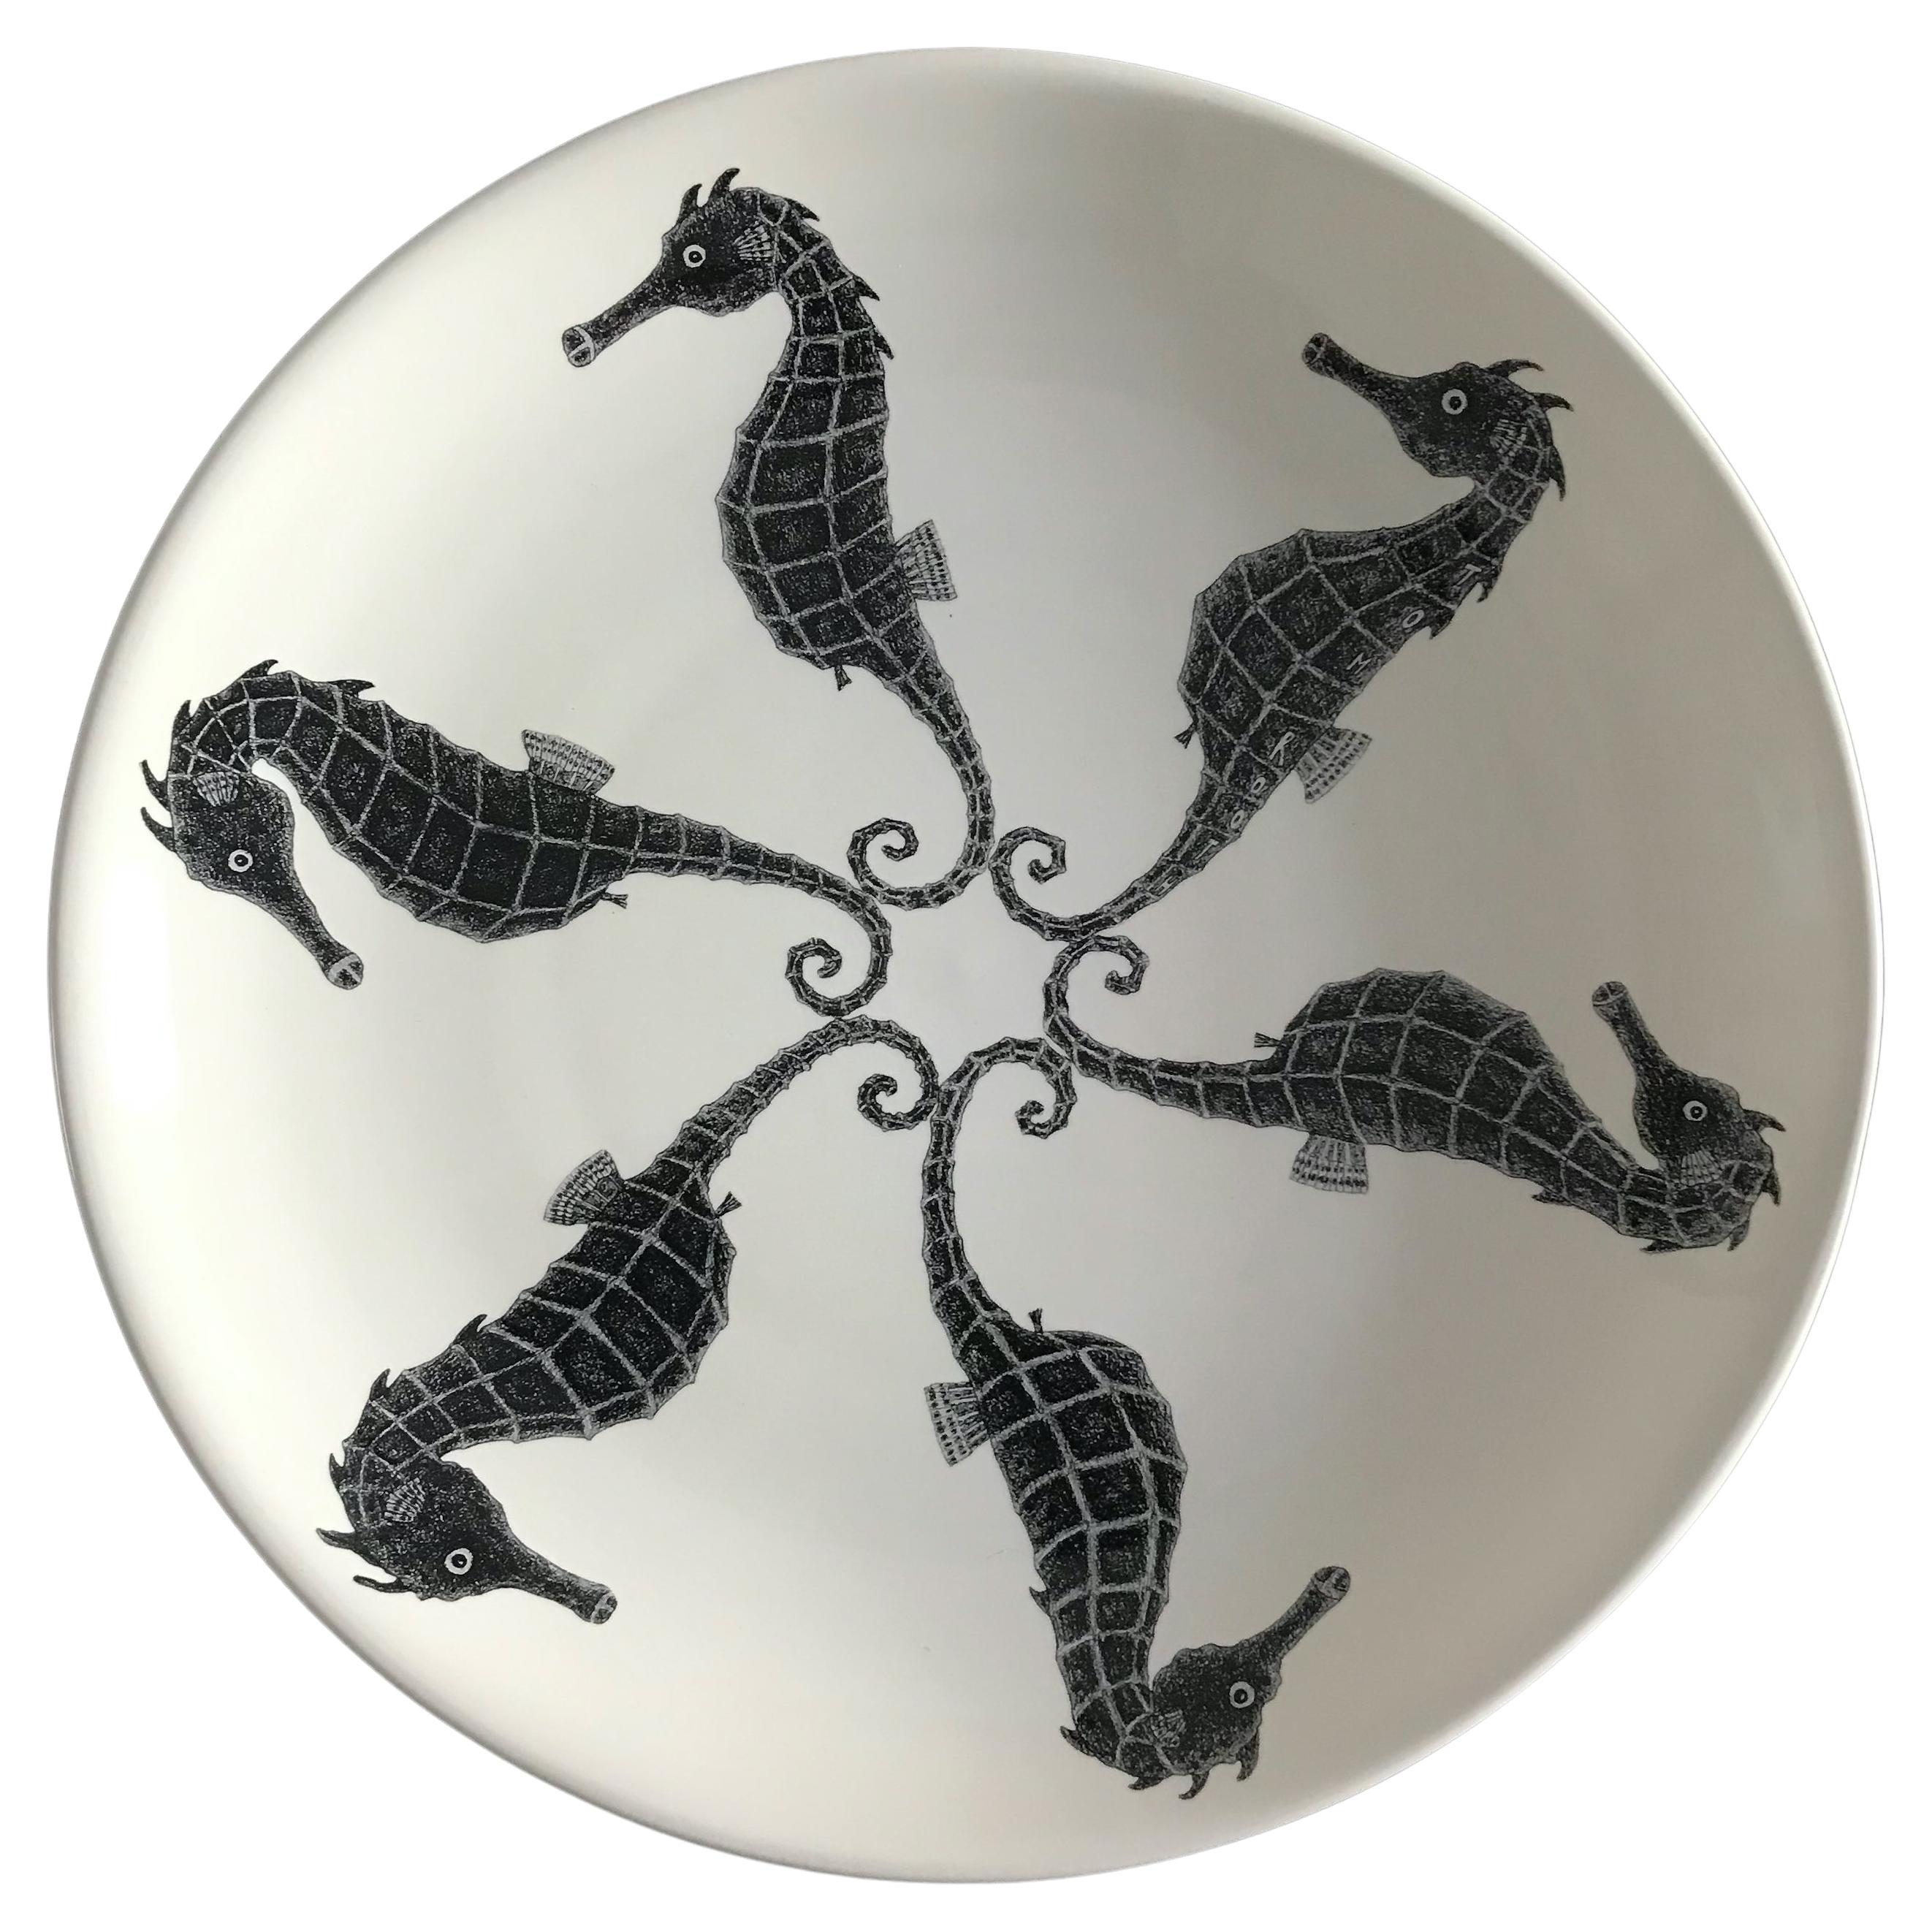 Circling Seahorses, von Tom Rooth